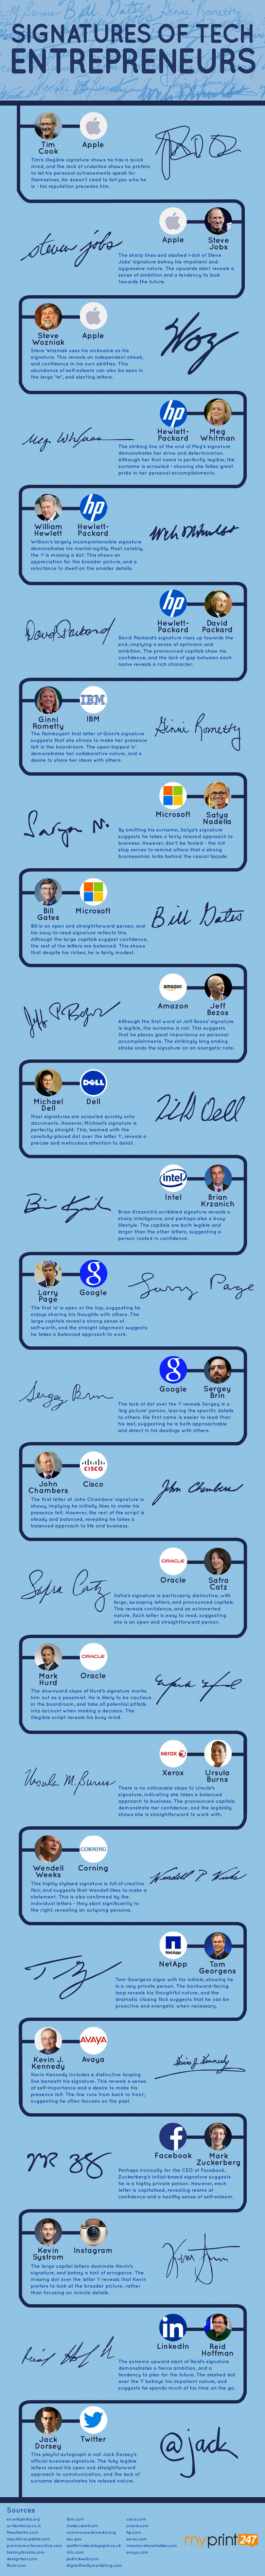 Handwriting Analysis of Signatures of Famous People (Infographic)